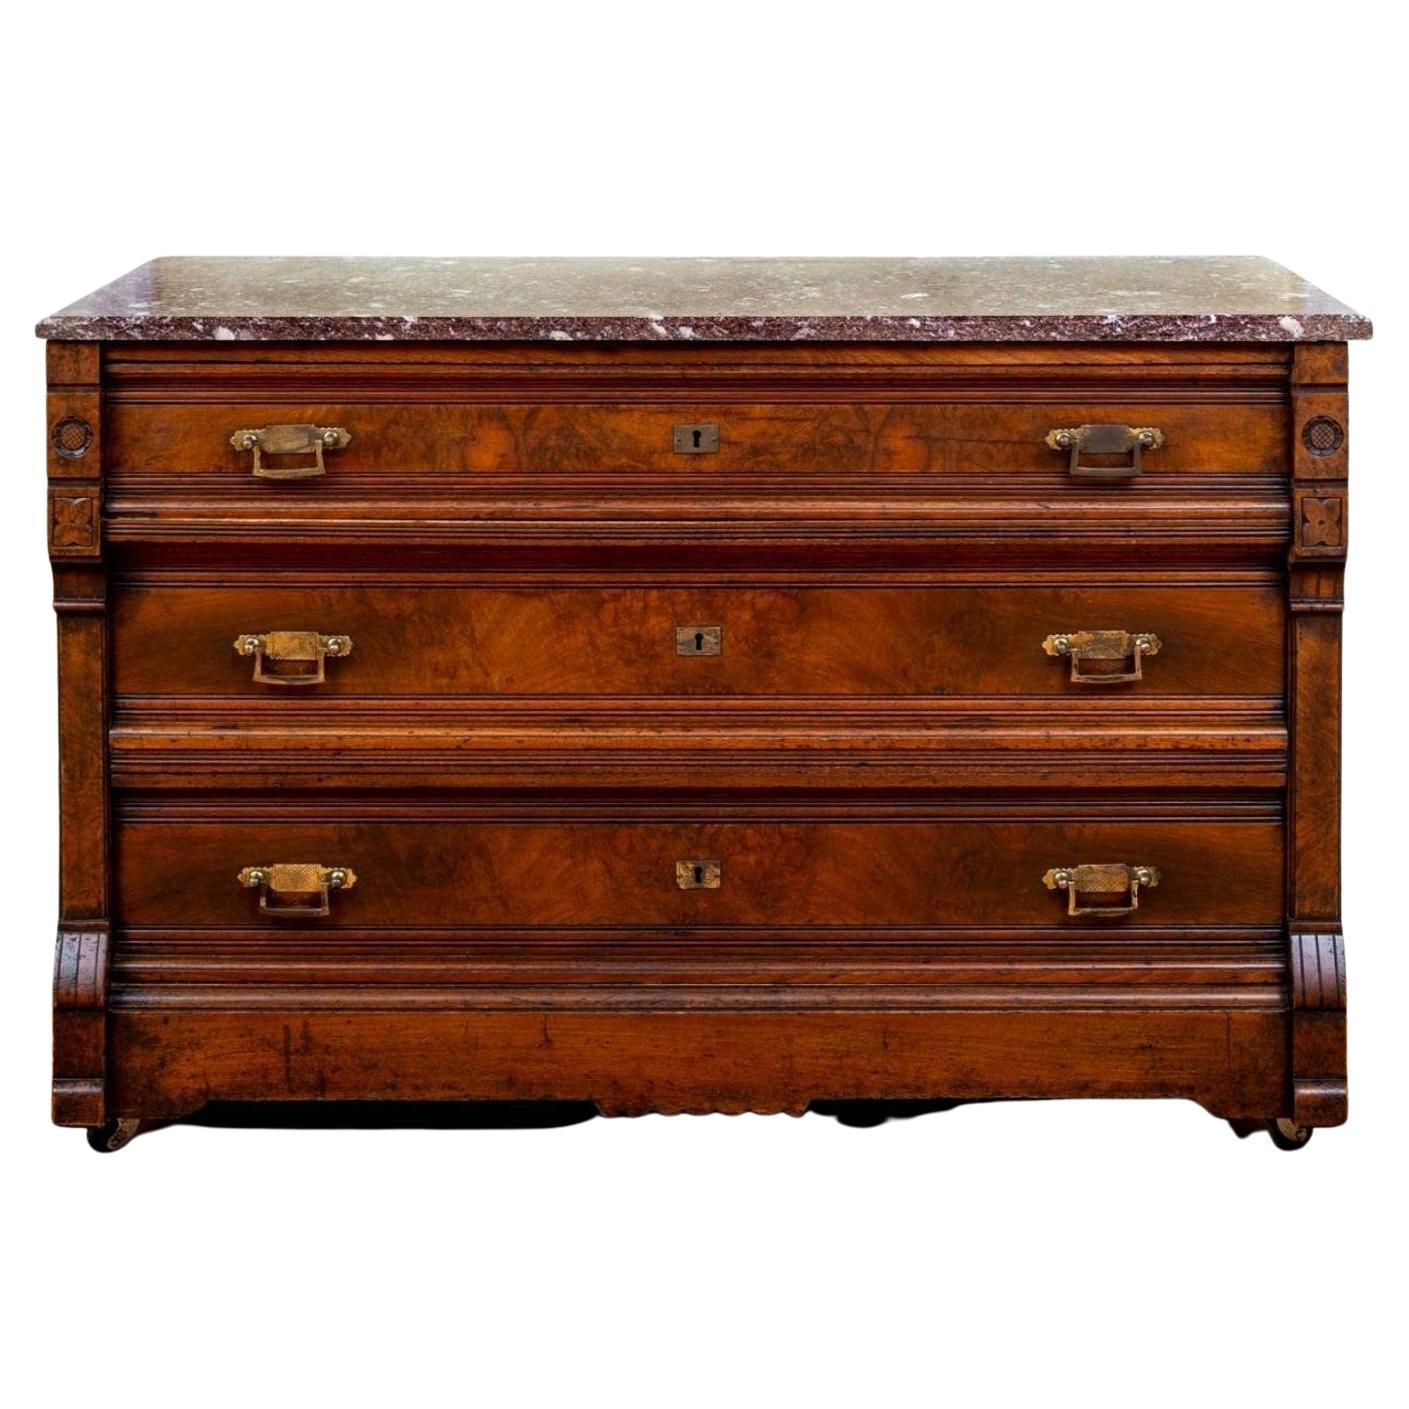 A 19th century Victorian burled walnut marble topped chest of drawers with warm, rich patina. 

The beautifully aged antique commode, circa 1870, retaining the original rectangular shaped 
brown / wine marble top with attractive veining, resting